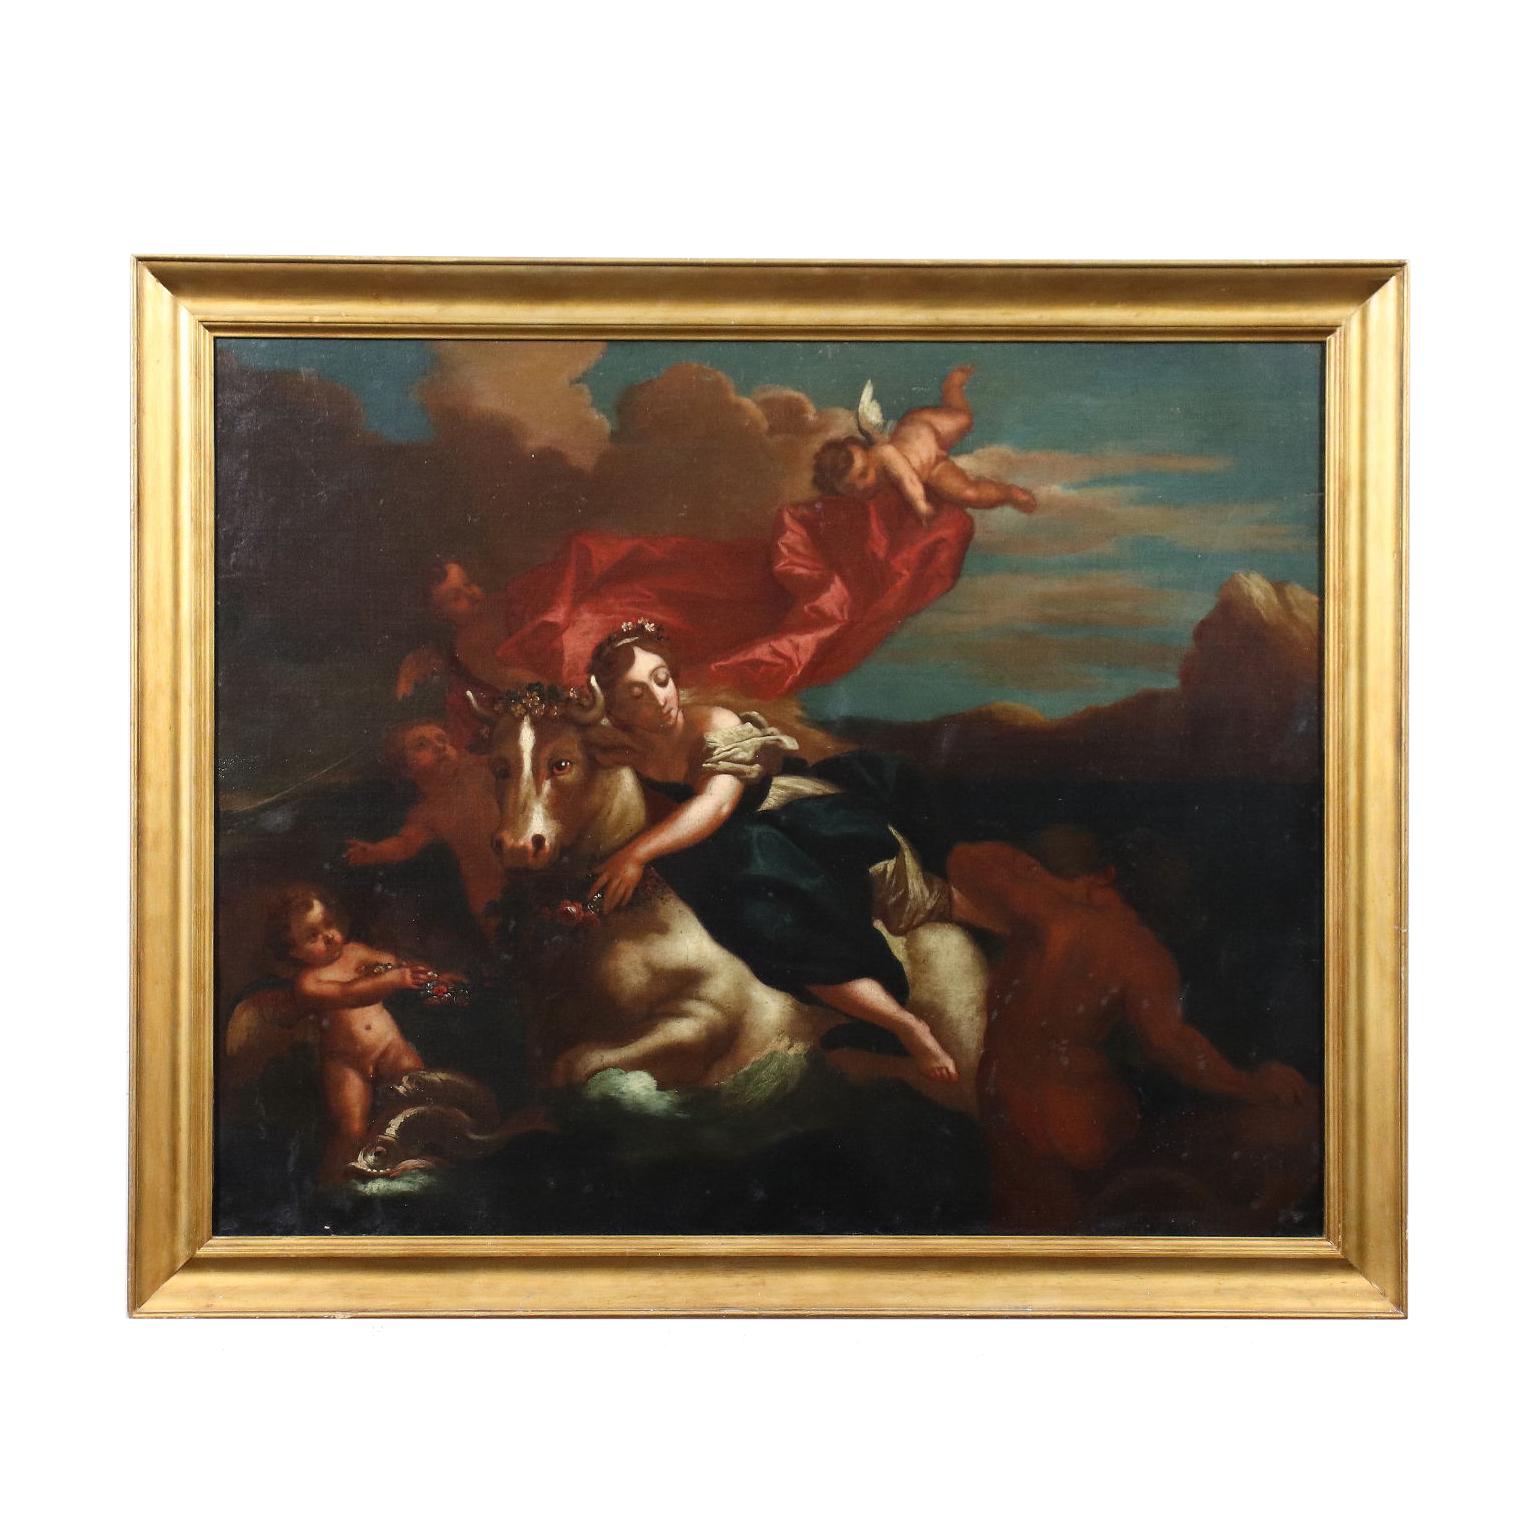 Unknown Figurative Painting - The Rape of Europe, oil on cavas, 1700s